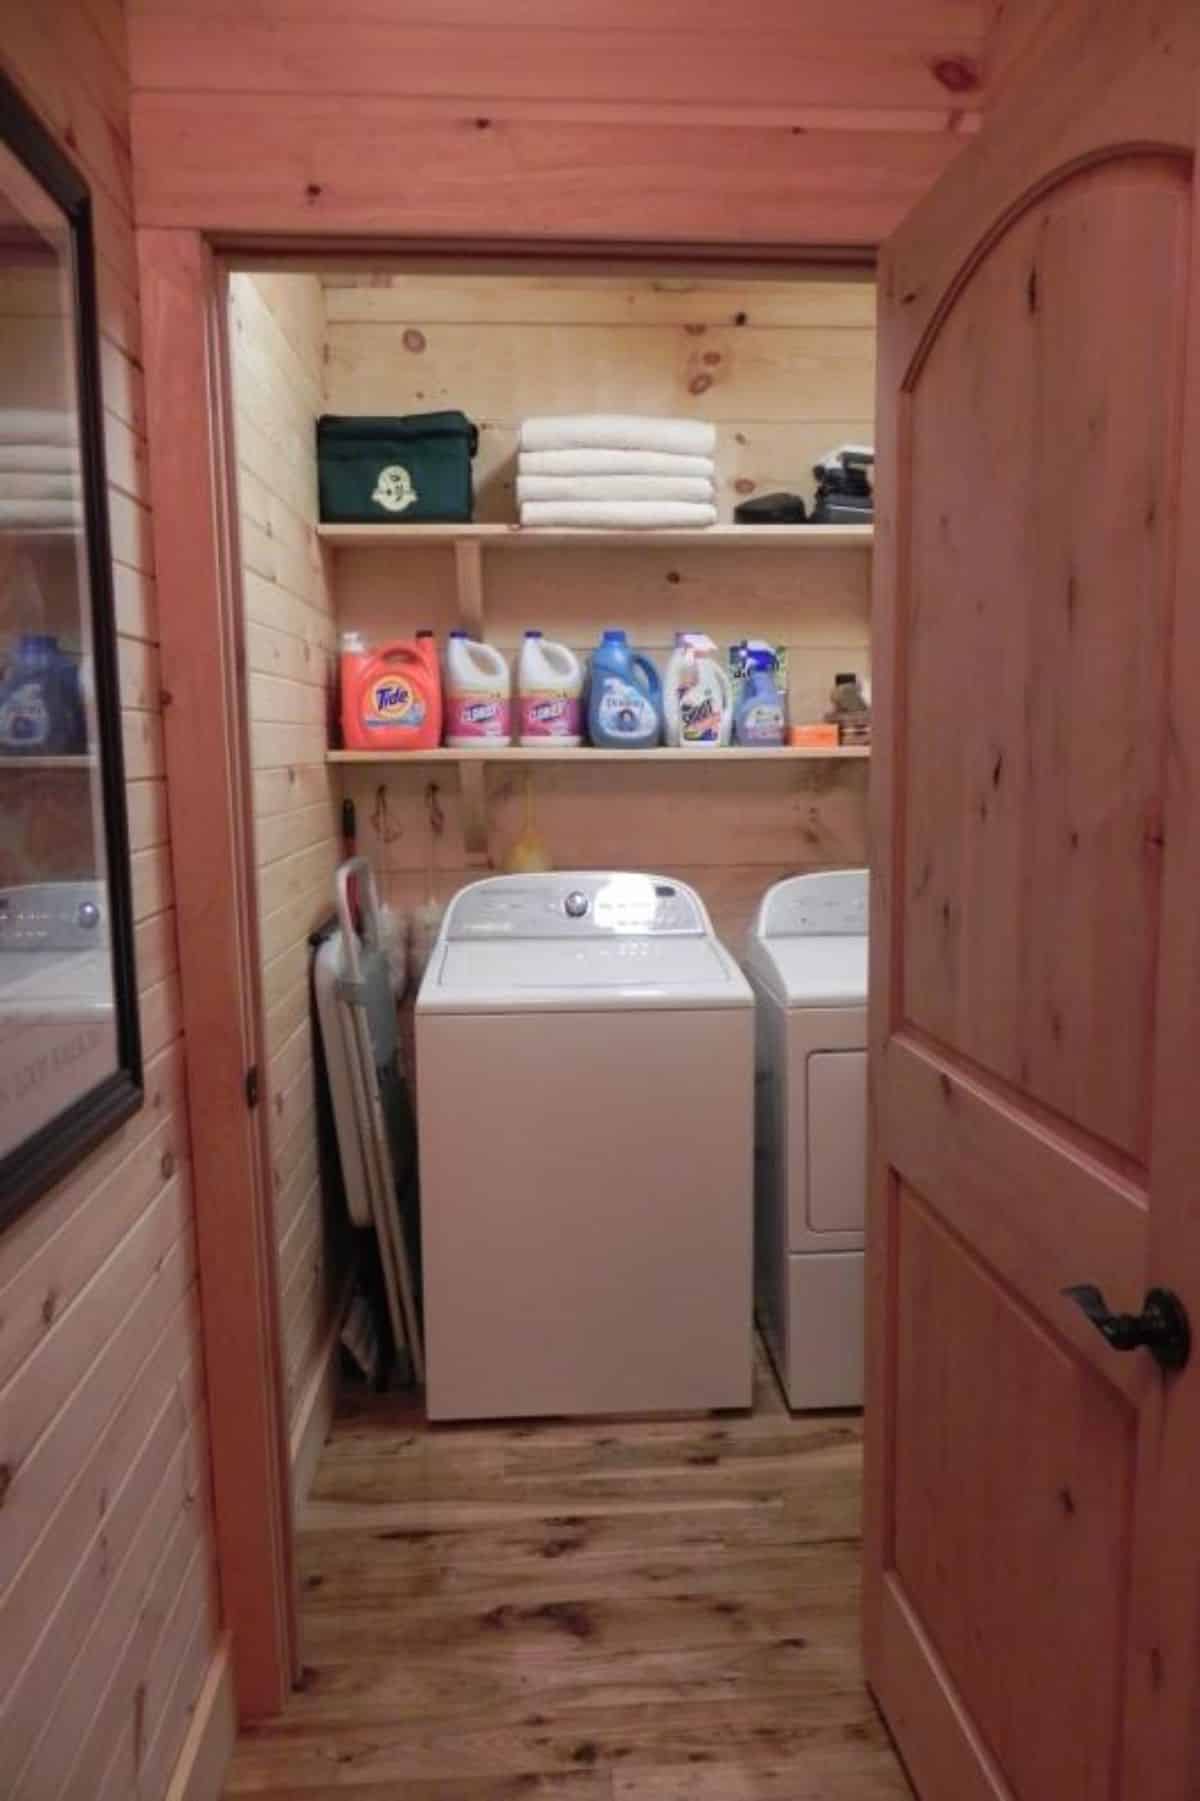 view into laundry room with white washer and dryer